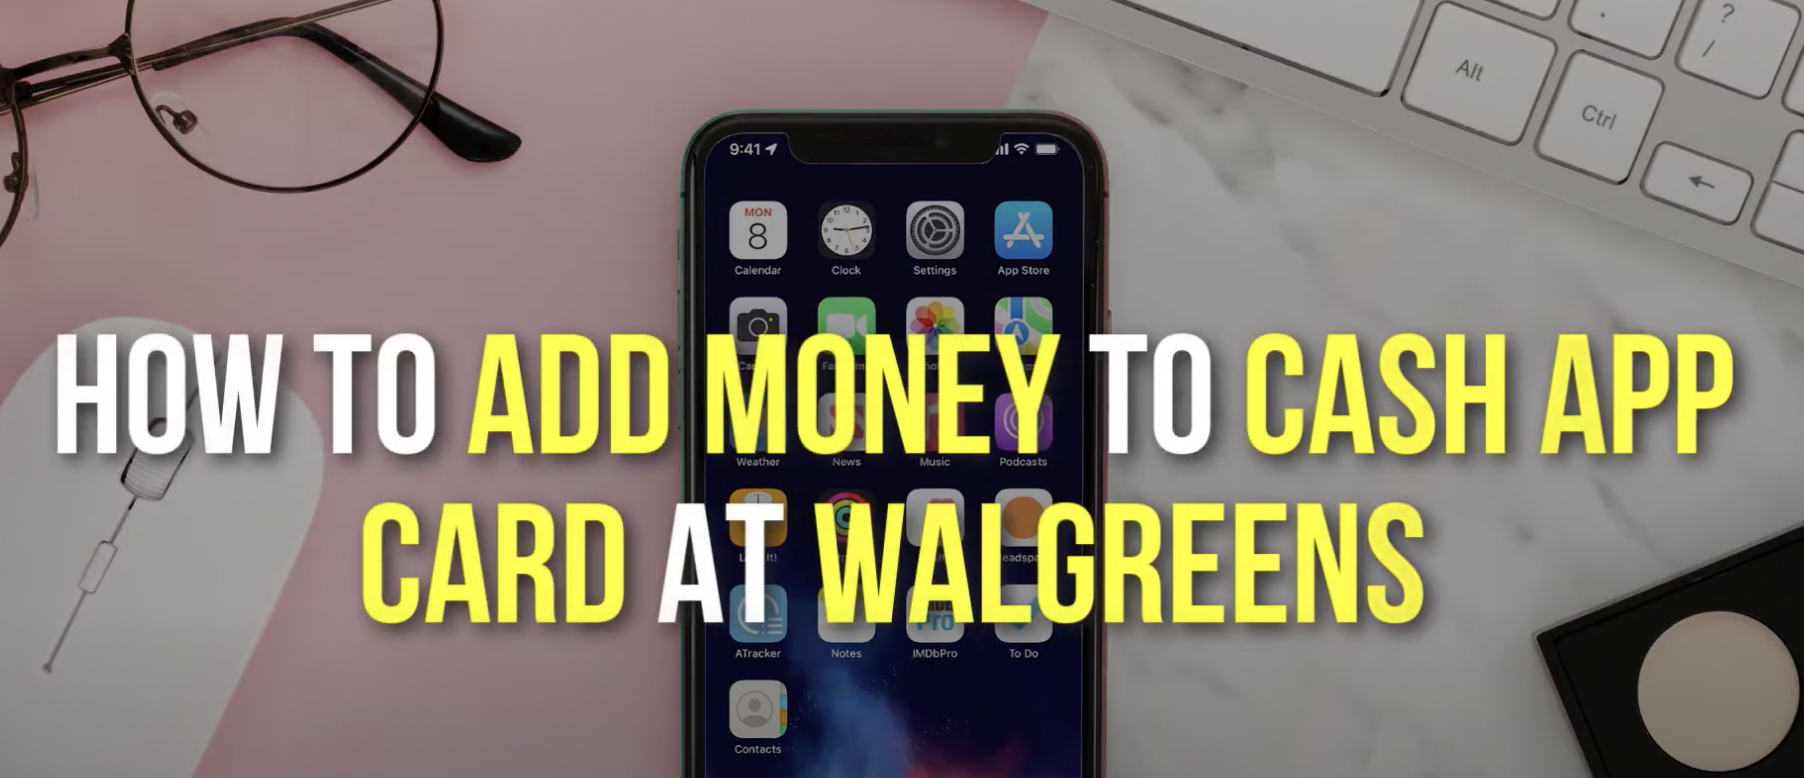 How to Add Money to Cash App Card at Walgreens